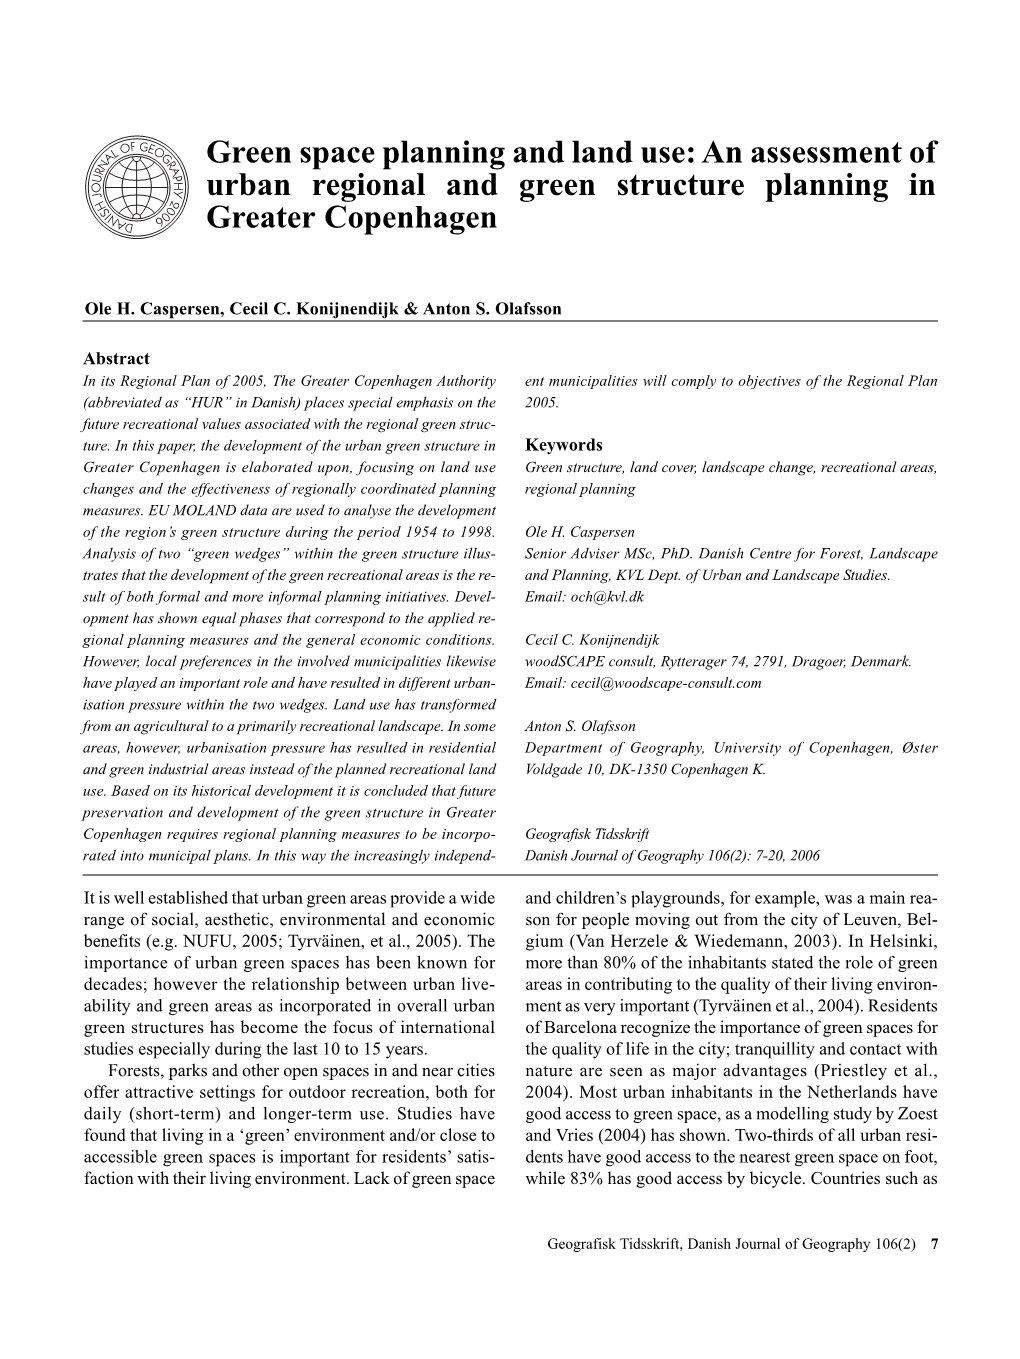 Green Space Planning and Land Use: an Assessment of Urban Regional and Green Structure Planning in Greater Copenhagen